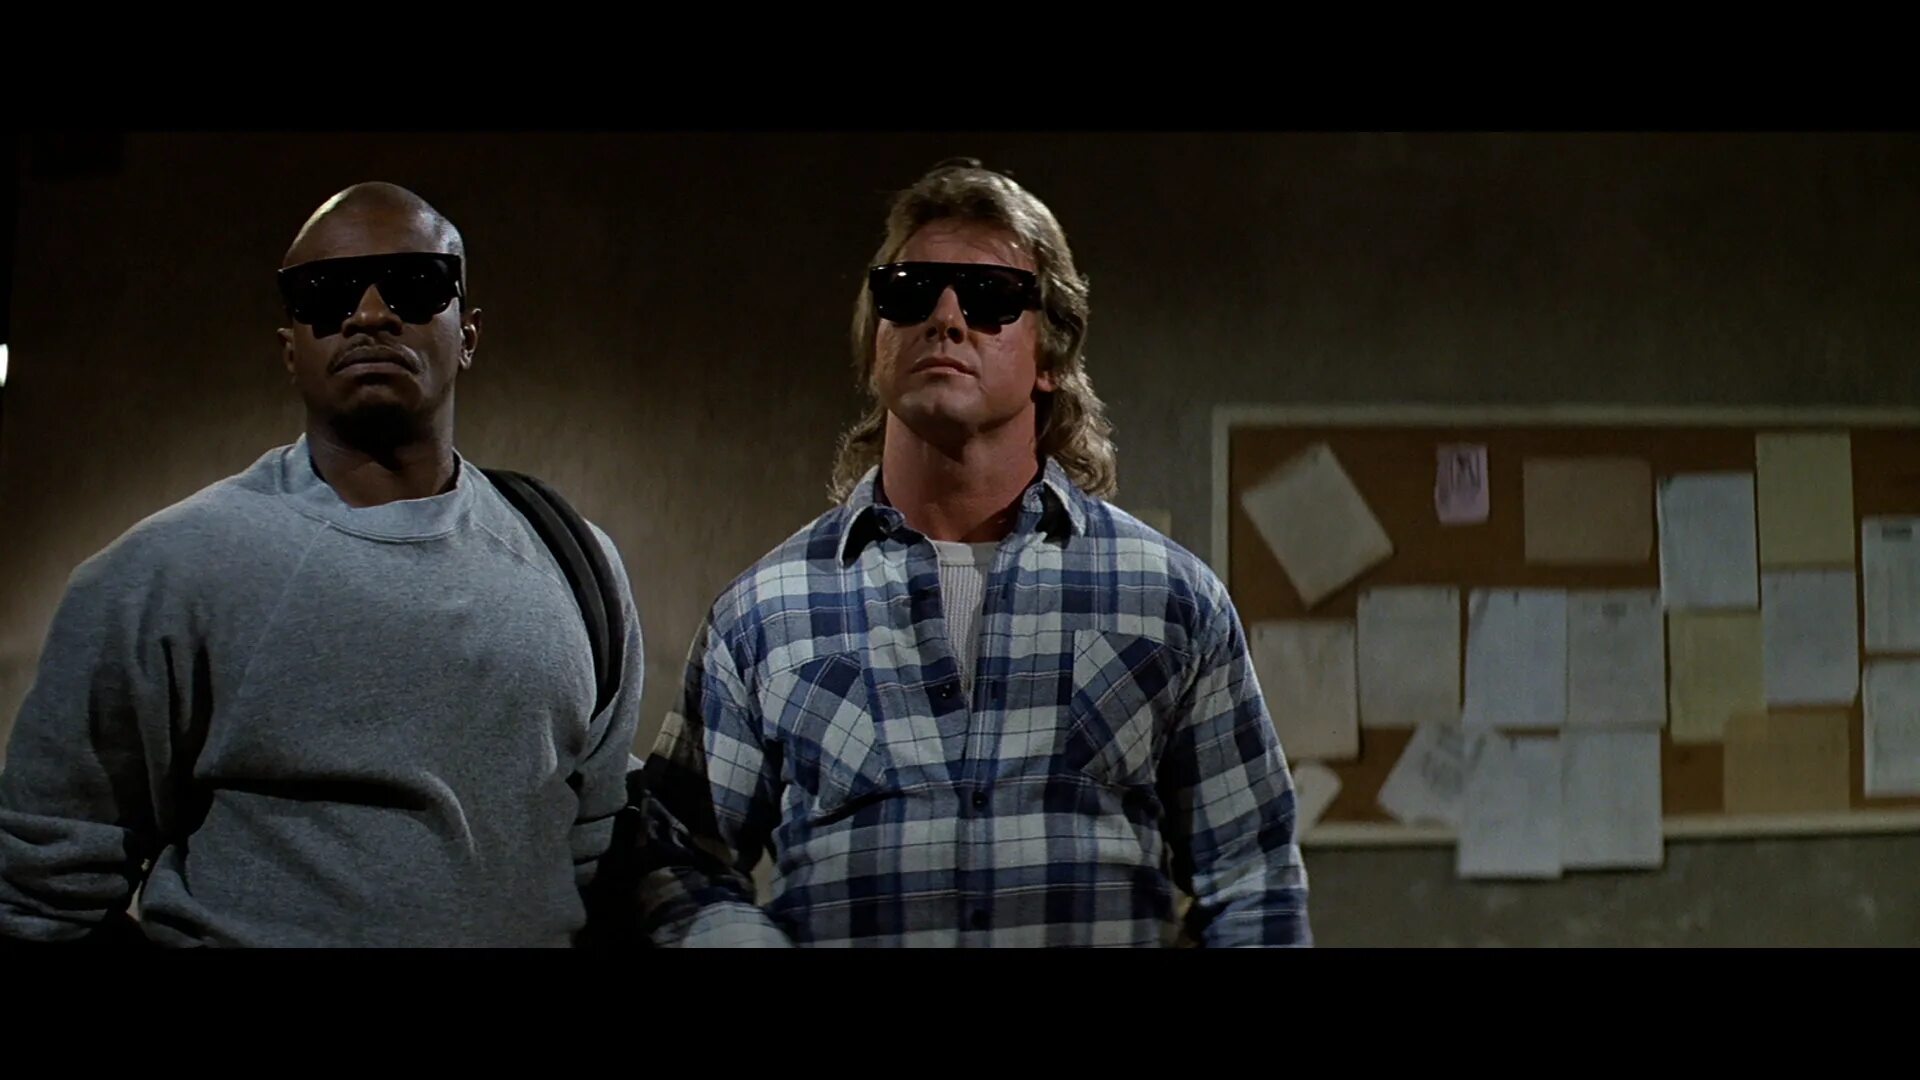 They live game